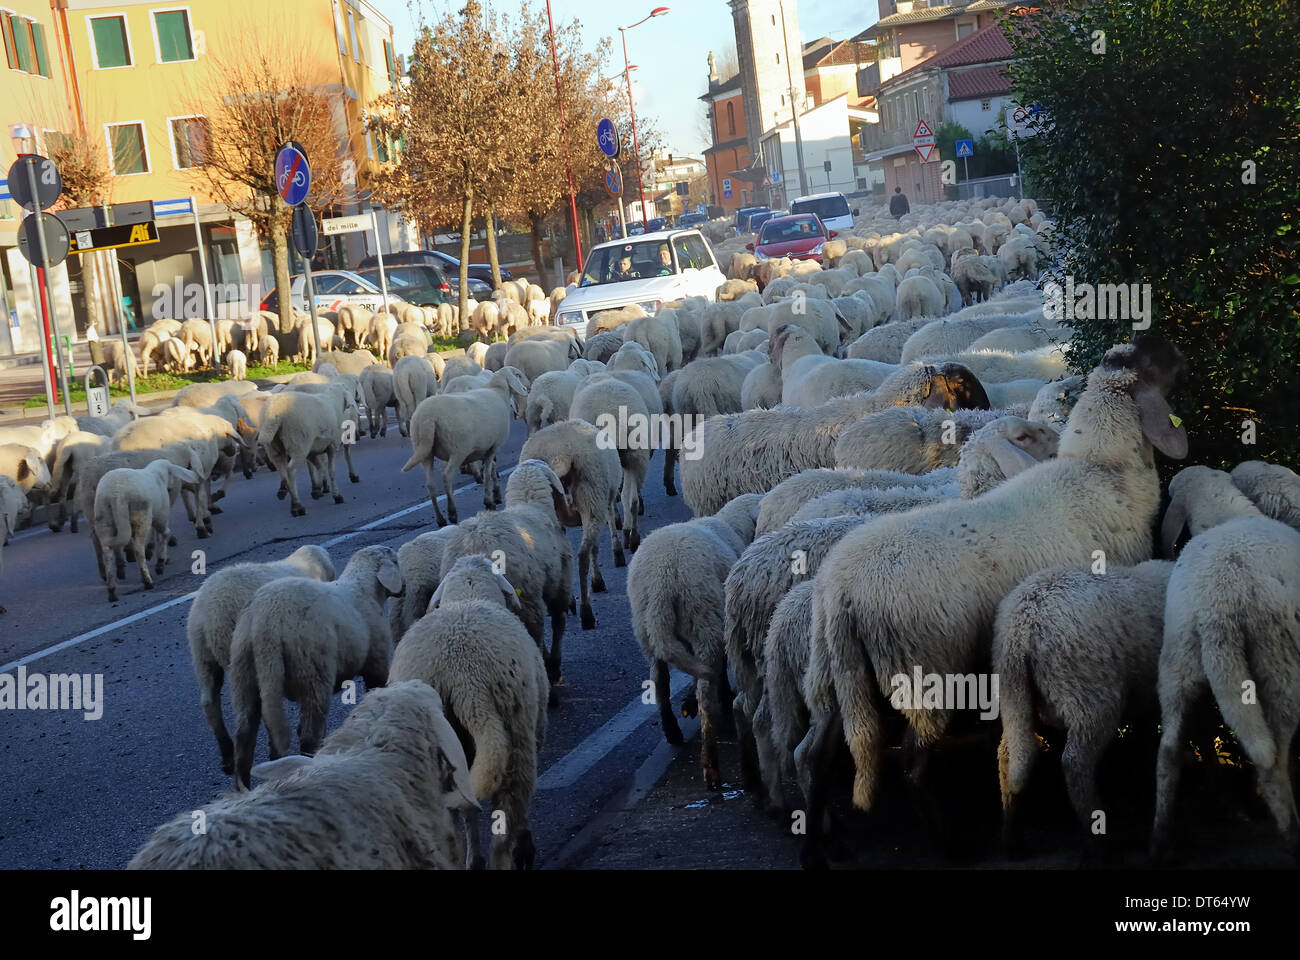 Cadoneghe, Veneto, Italy : transhumance of the sheep. A transhumant flock of sheep, on its way to the mountain pasture-lands, Stock Photo